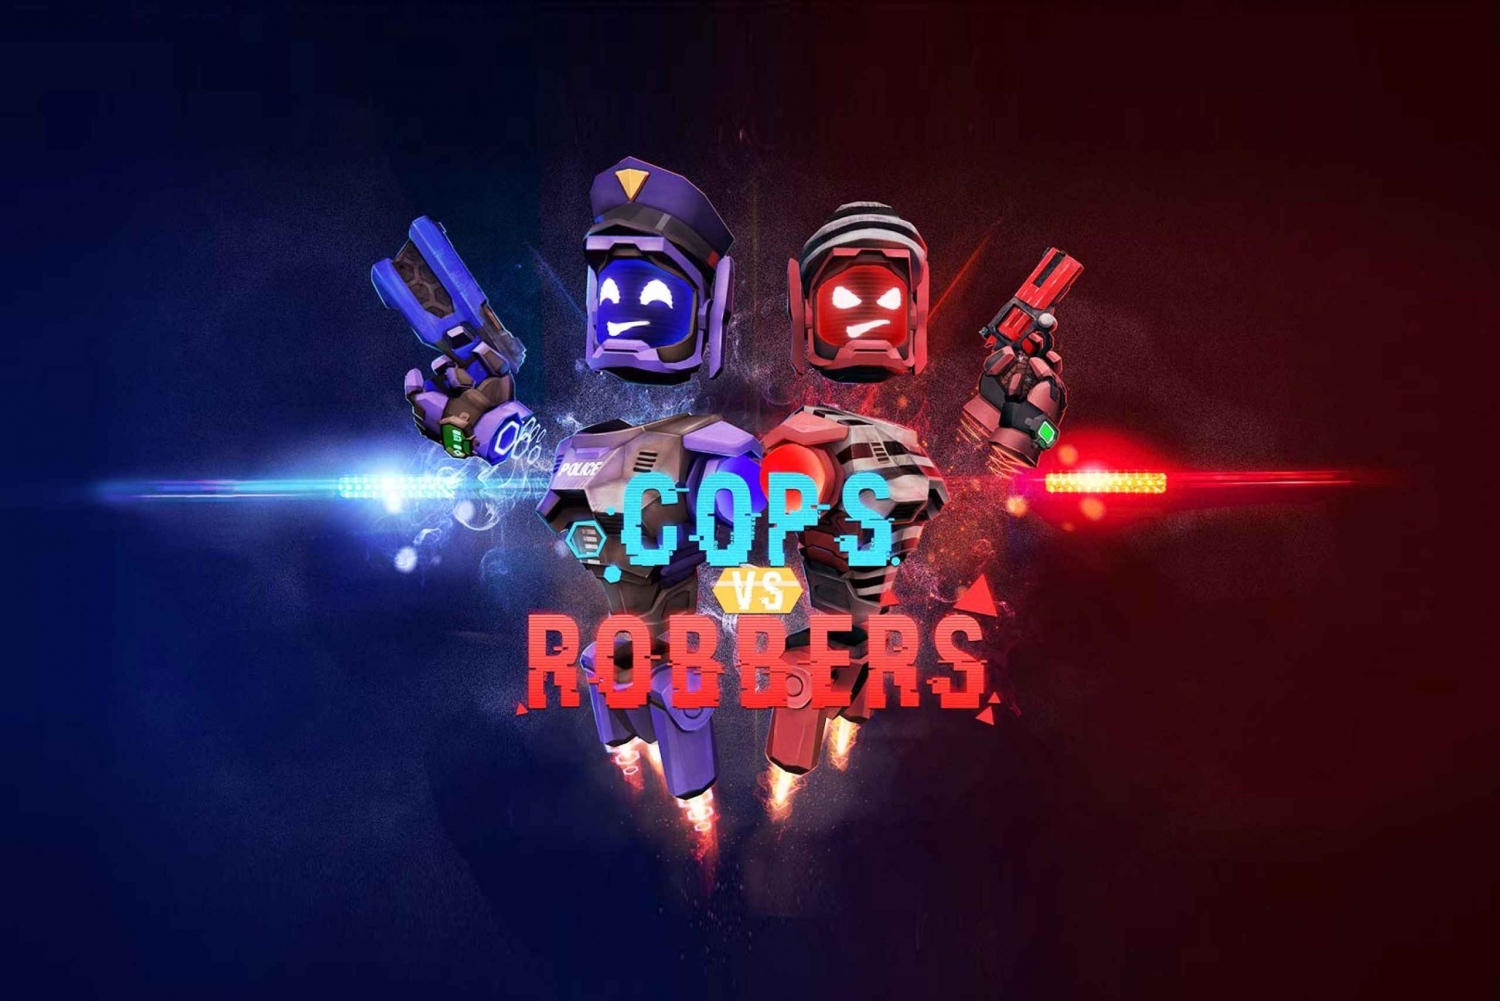 VR game Cops and Robbers in Amsterdam